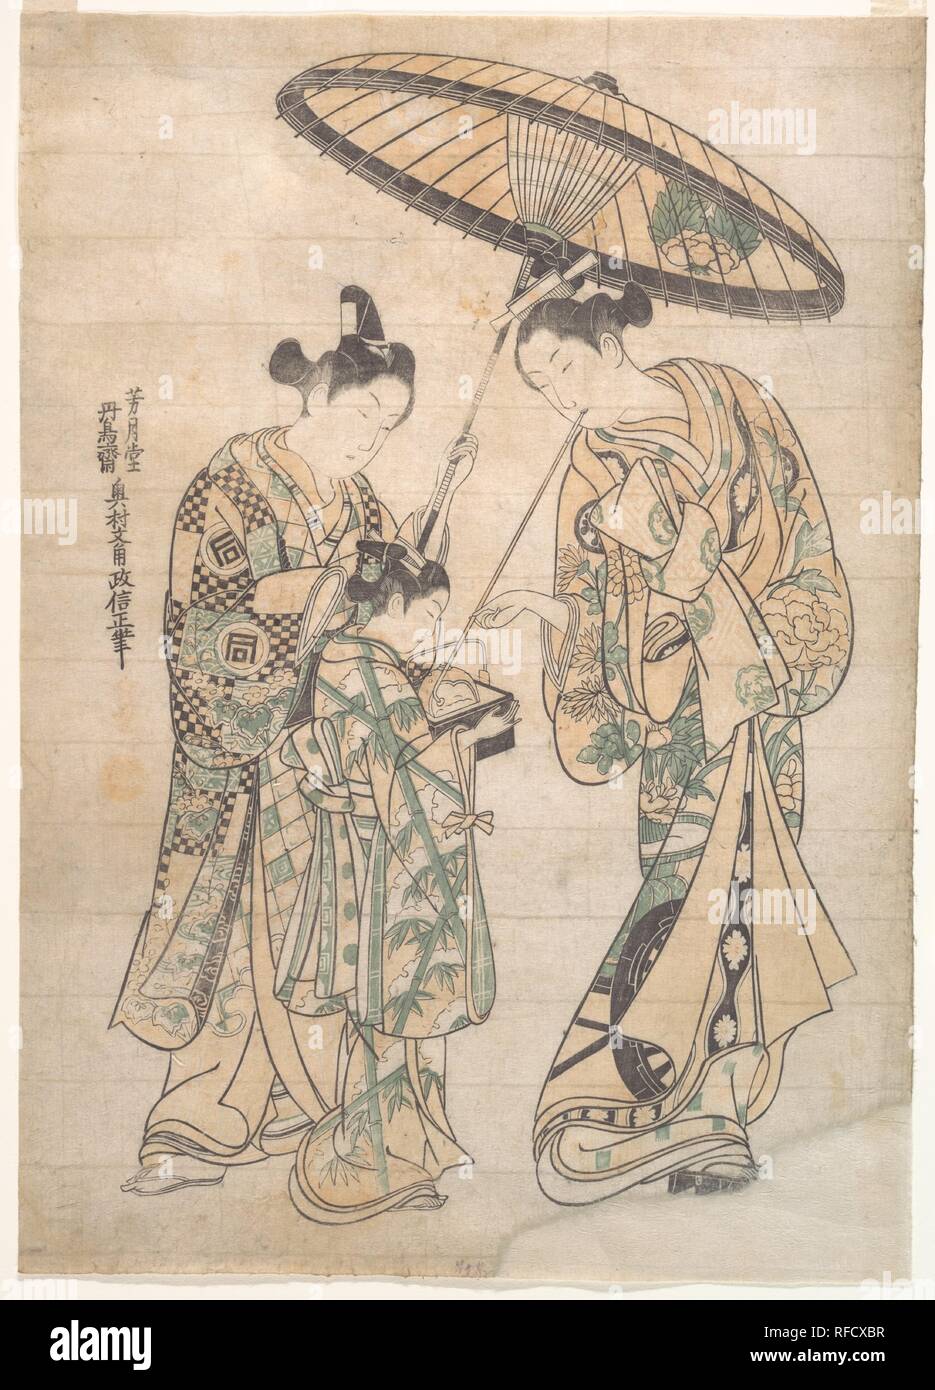 Two Figures. Artist: Okumura Masanobu (Japanese, 1686-1764). Culture: Japan. Dimensions: H. 12 1/8 in. (30.8 cm); W. 17 in. (43.2 cm).  The invention of color block printing by the mid-eighteenth century irrevocably transformed the vigorous early ukiyo-e style. The new technique, which used separate blocks for each color, placed greater attention on coordinating the component parts and emphasized the process of color overlays. Masanobu's pioneering efforts in the field of color printing advanced a new aesthetic, one in which the essential quality of the print was dependent on line and color. A Stock Photo